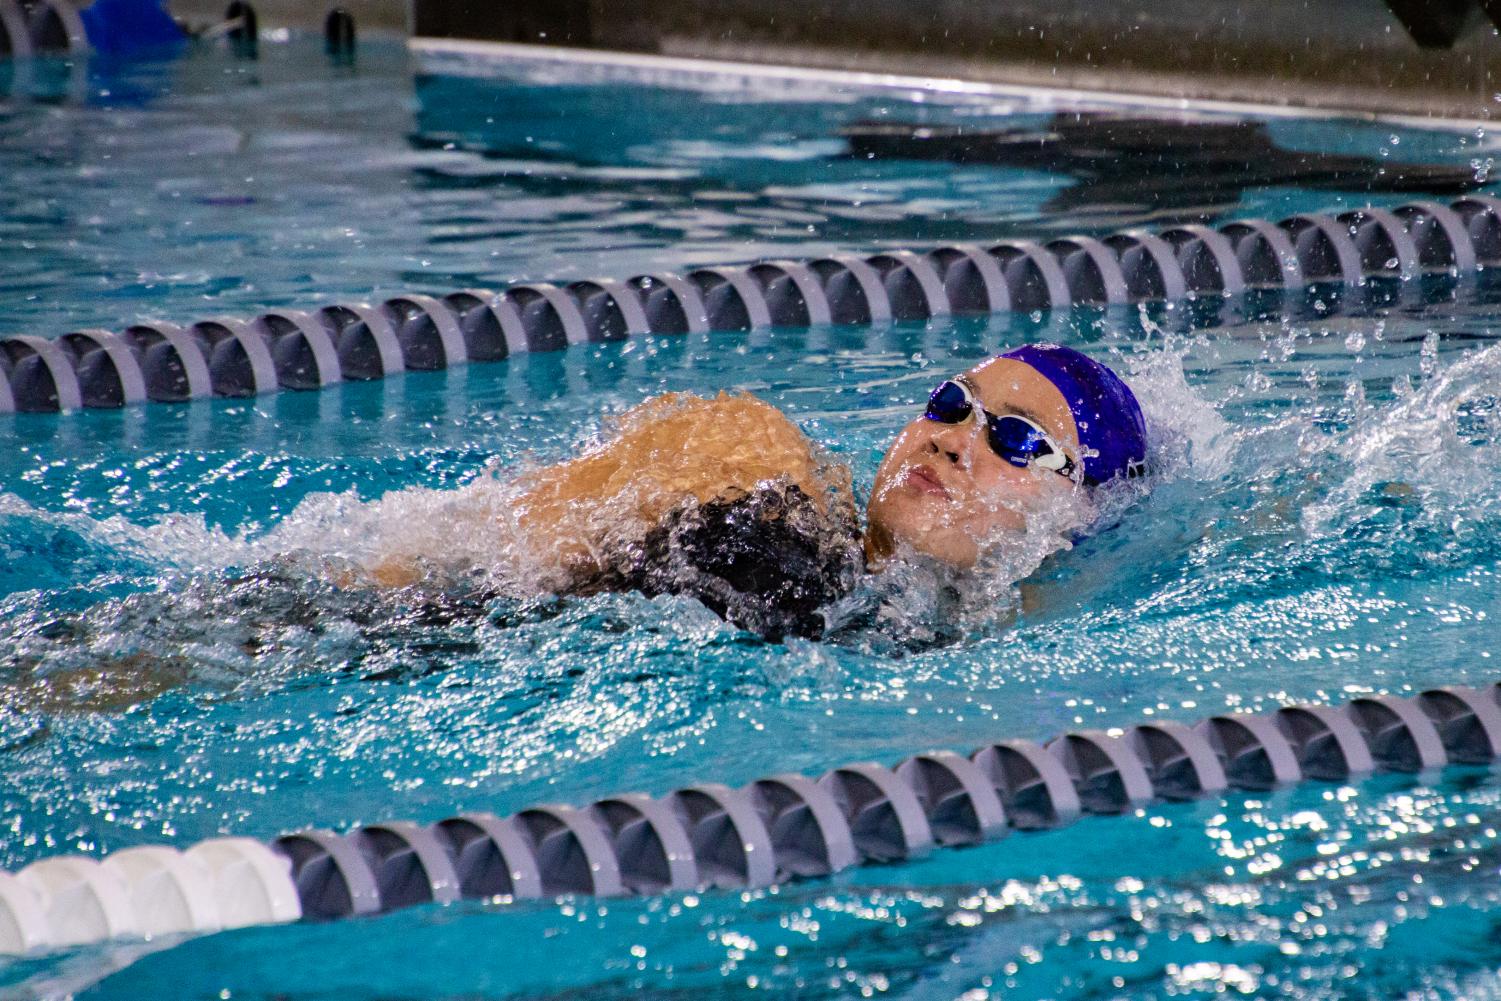 A swimmer with a purple cap comes up for a breath of fresh air.